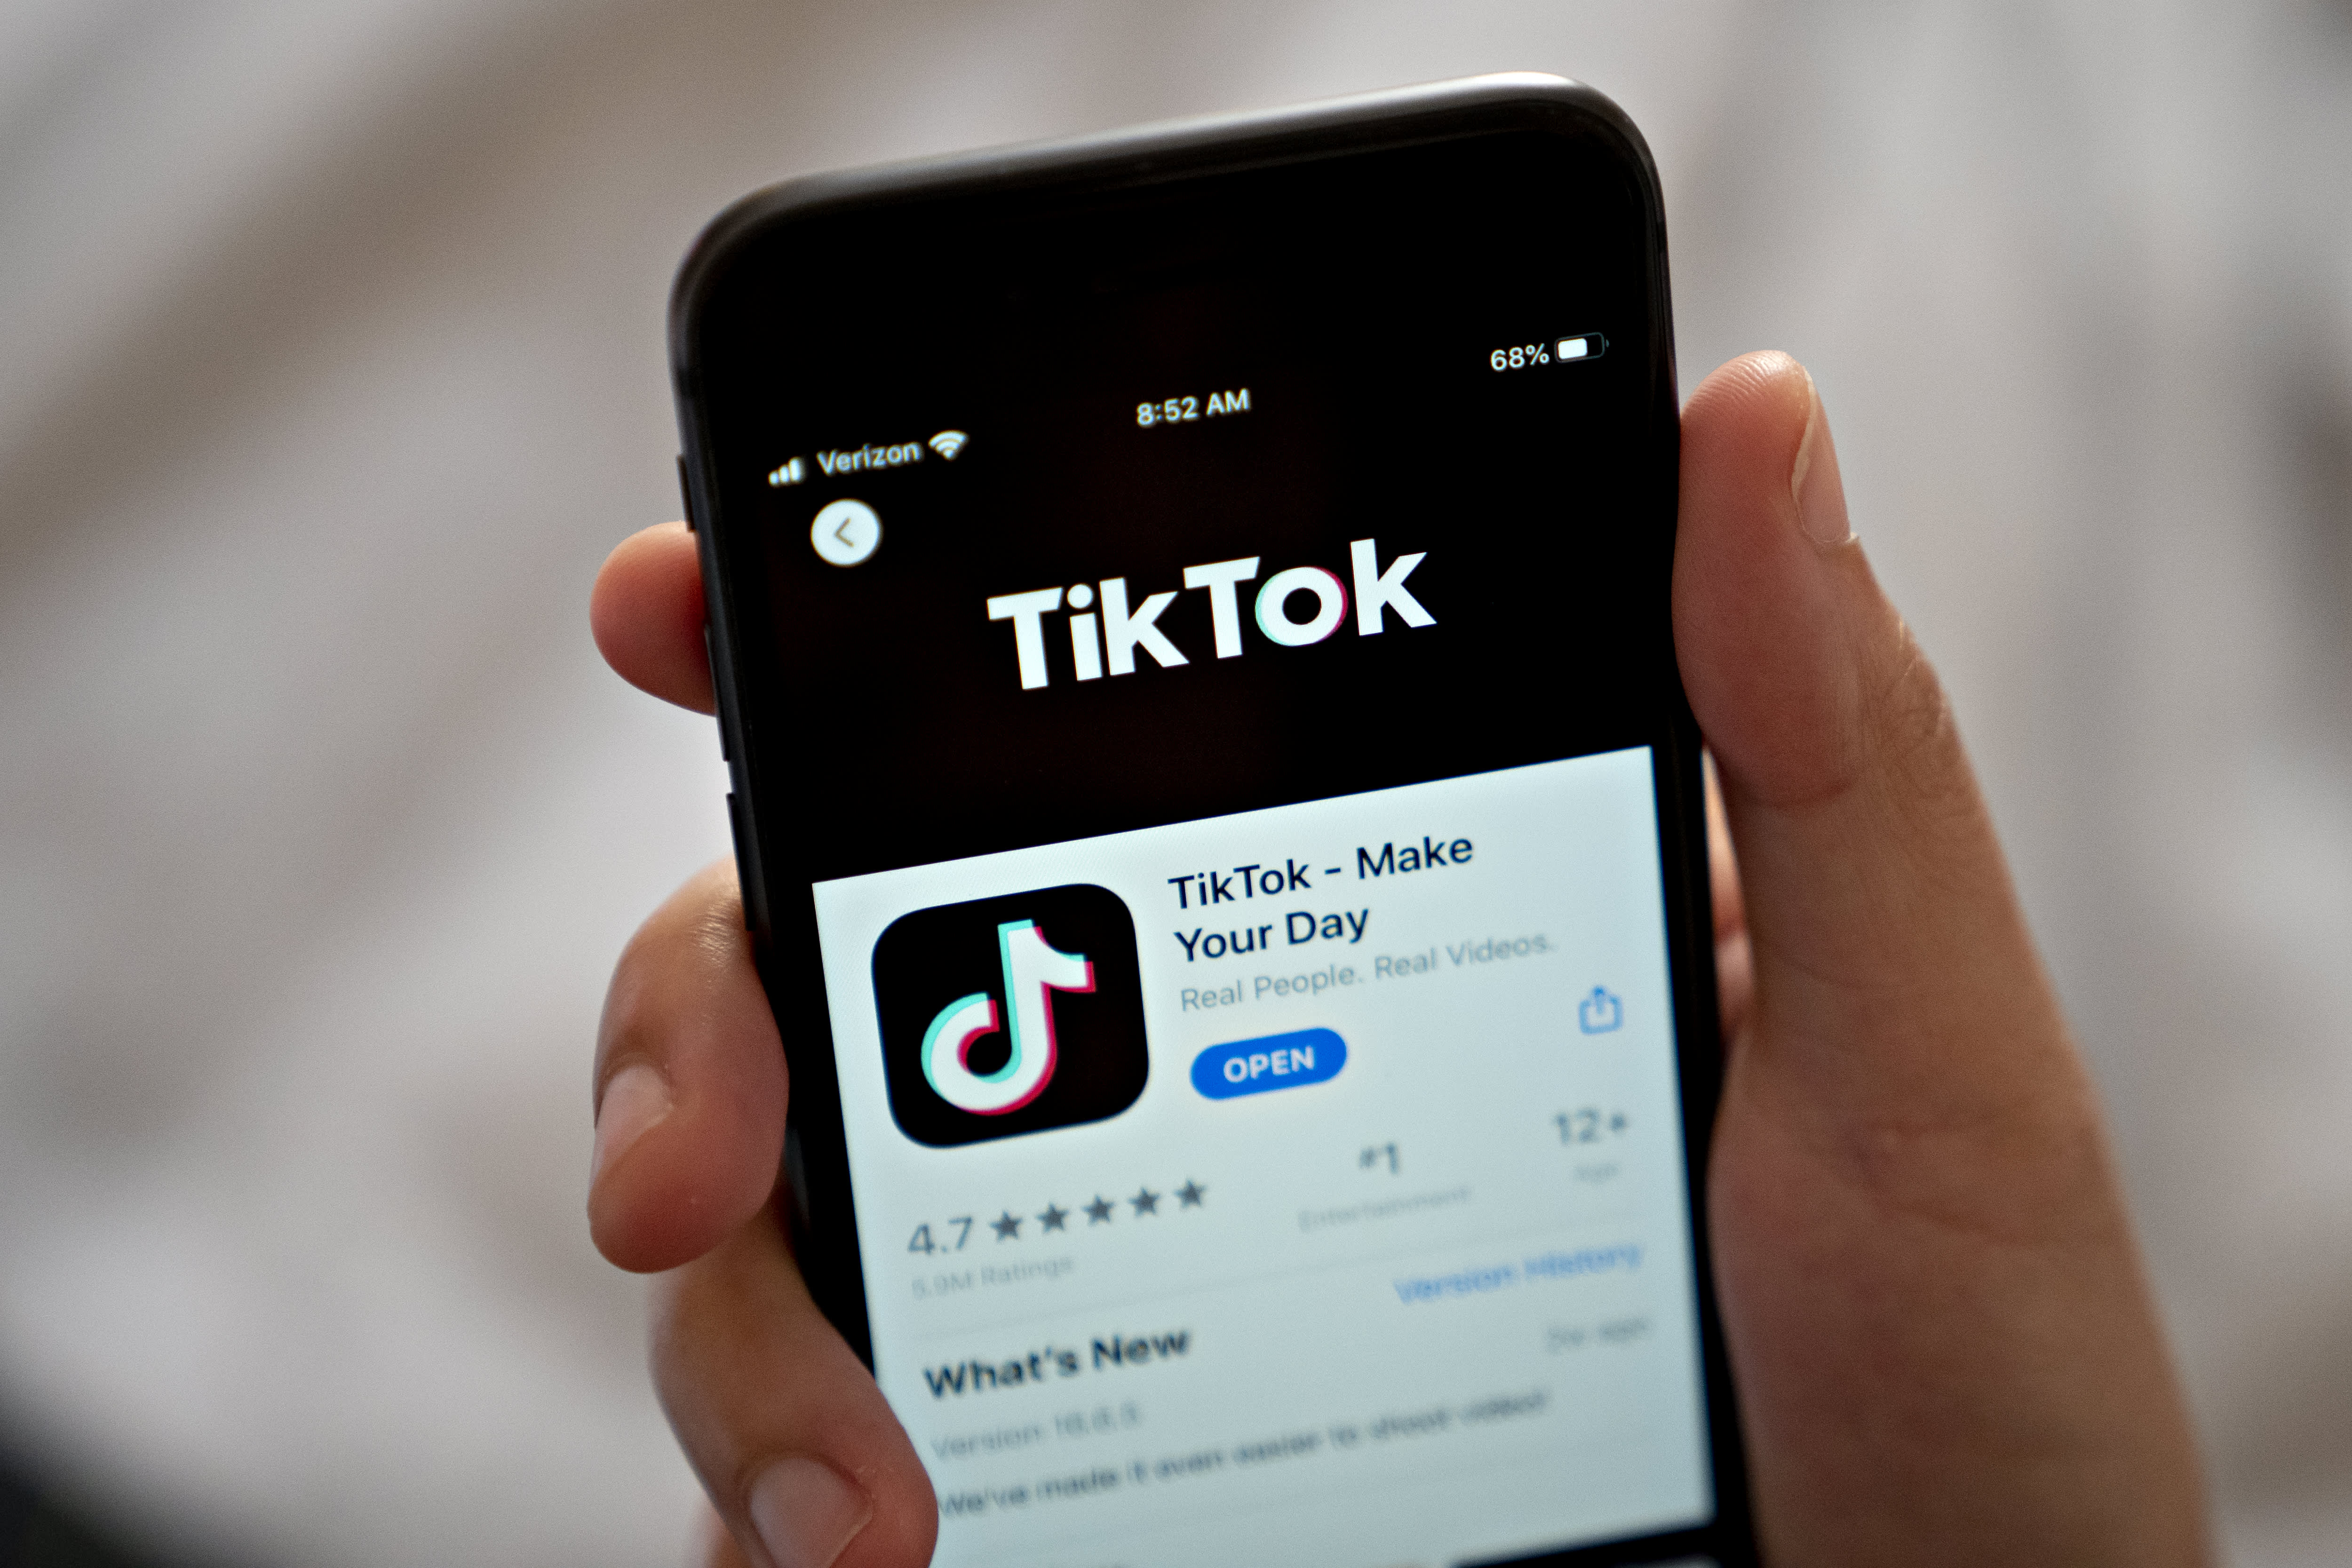 Are they allowed to use TikTok in China?